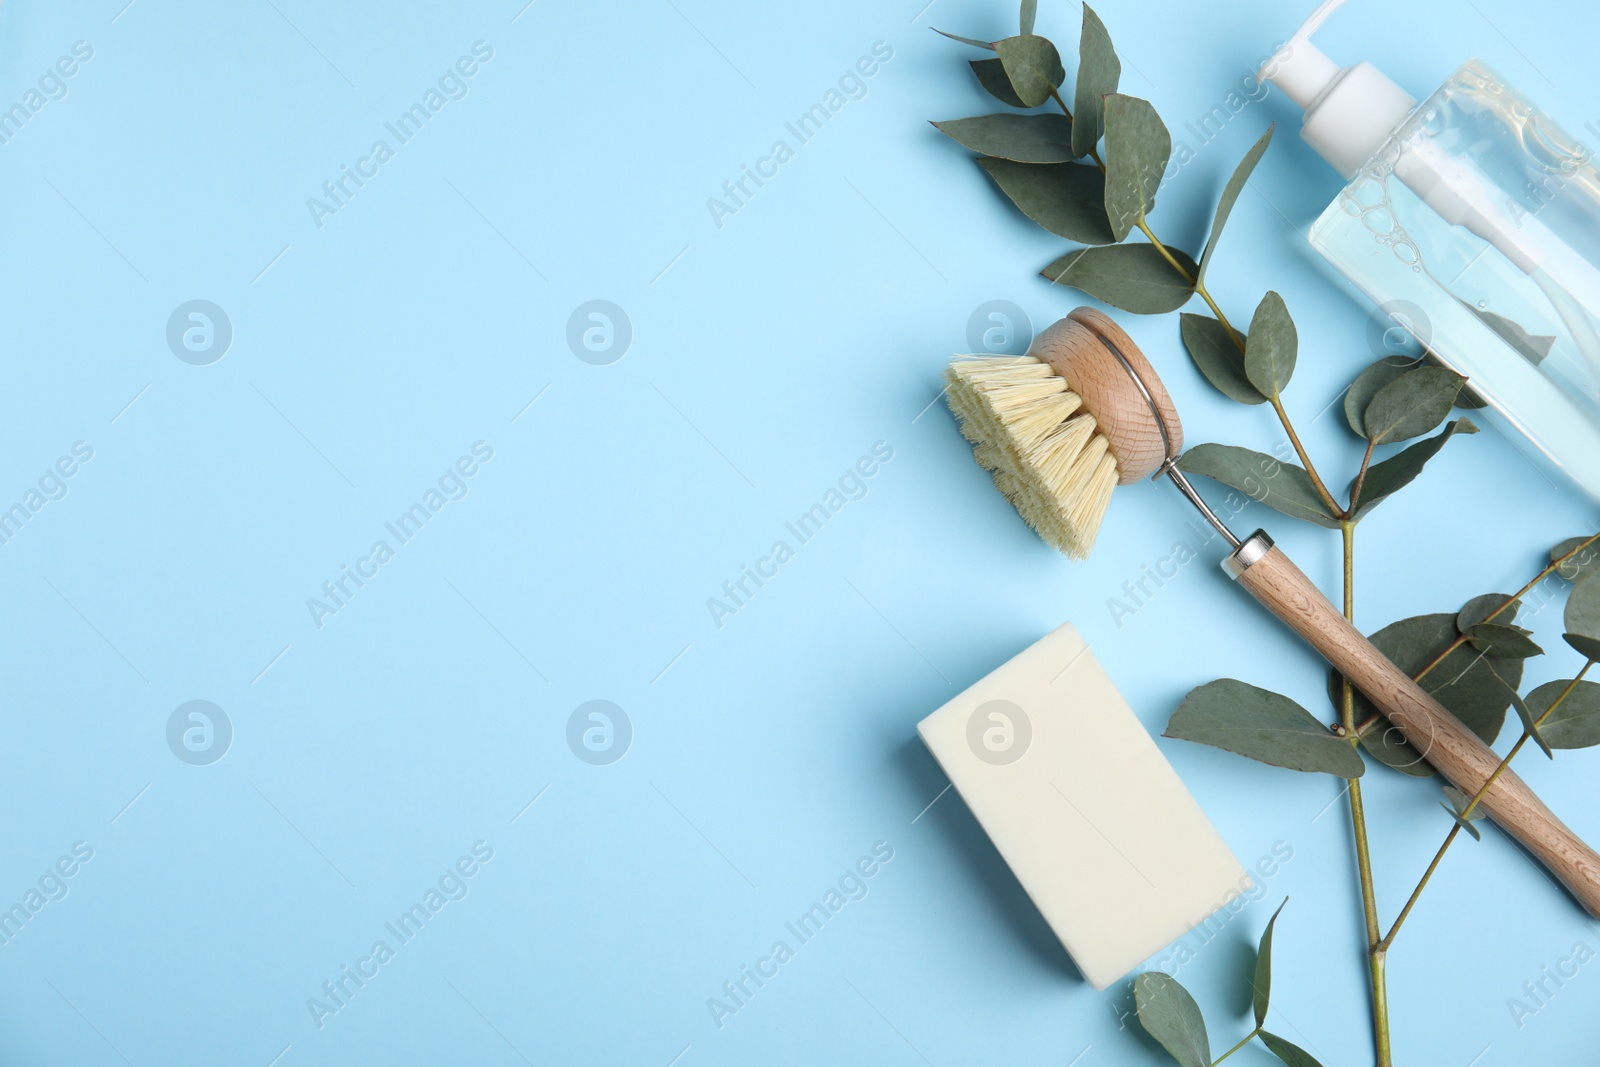 Photo of Flat lay composition with cleaning product and tools on light blue background, space for text. Dish washing supplies